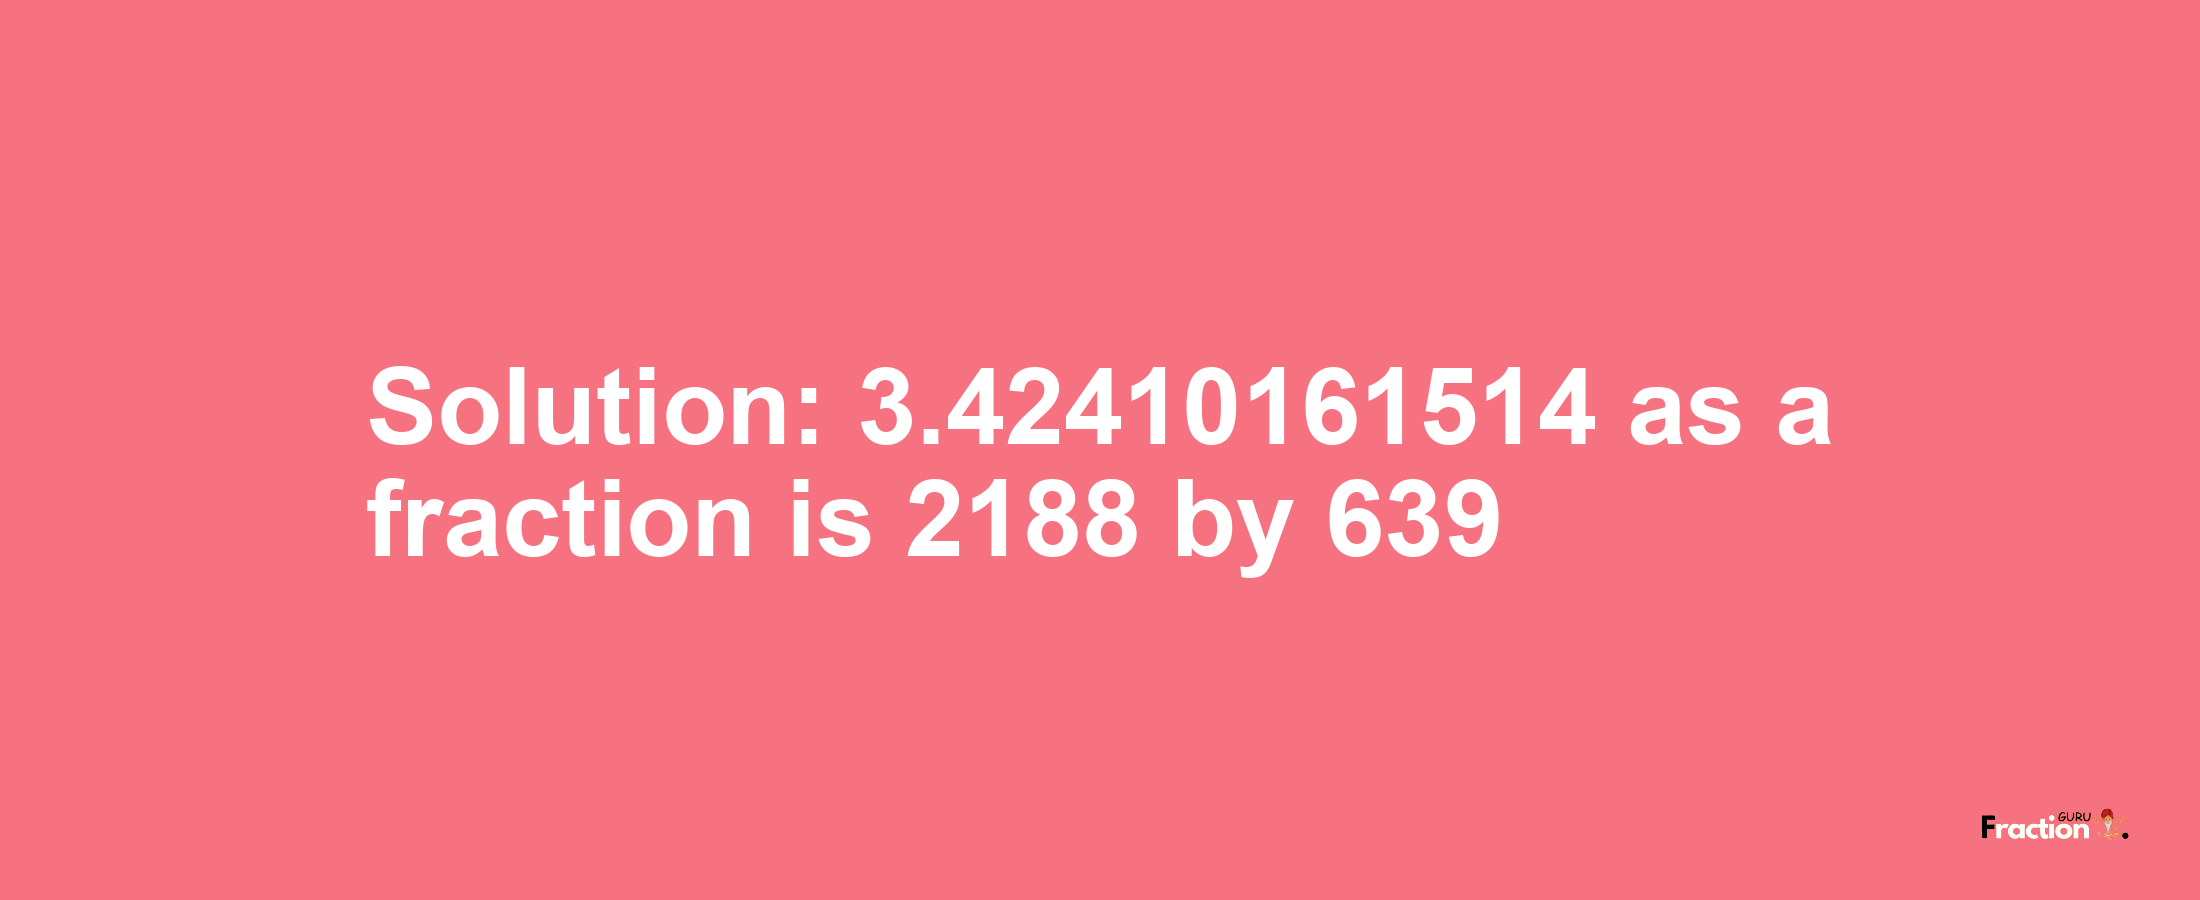 Solution:3.42410161514 as a fraction is 2188/639